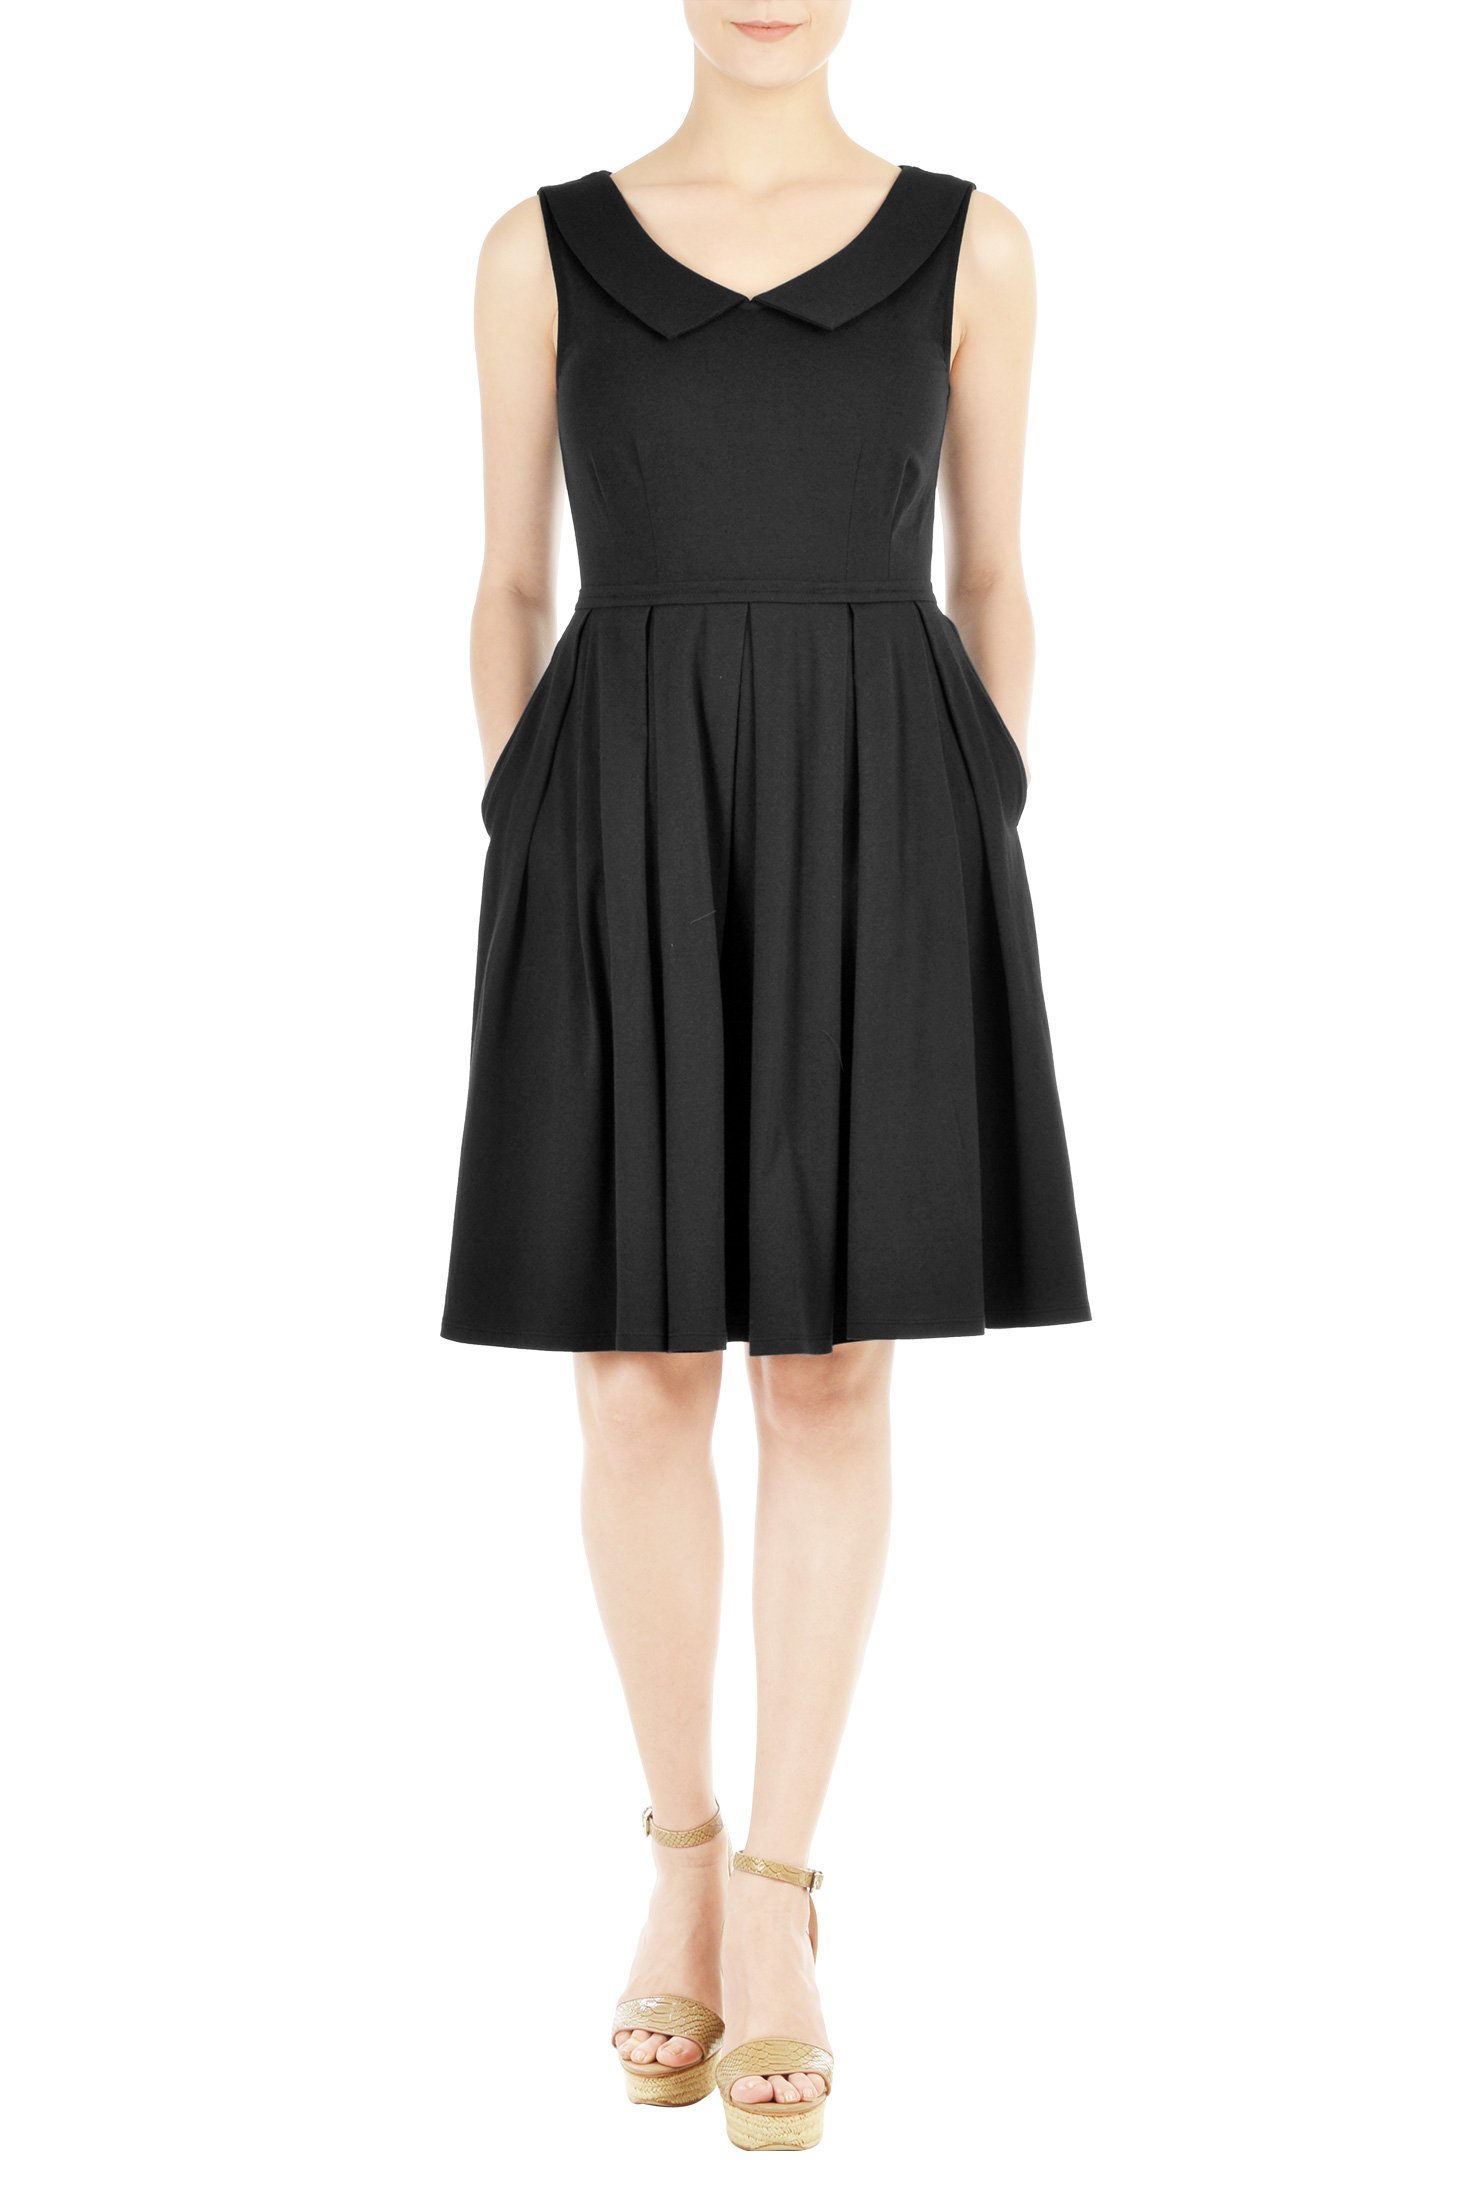 Shop Collared fit-and-flare cotton knit dress | eShakti